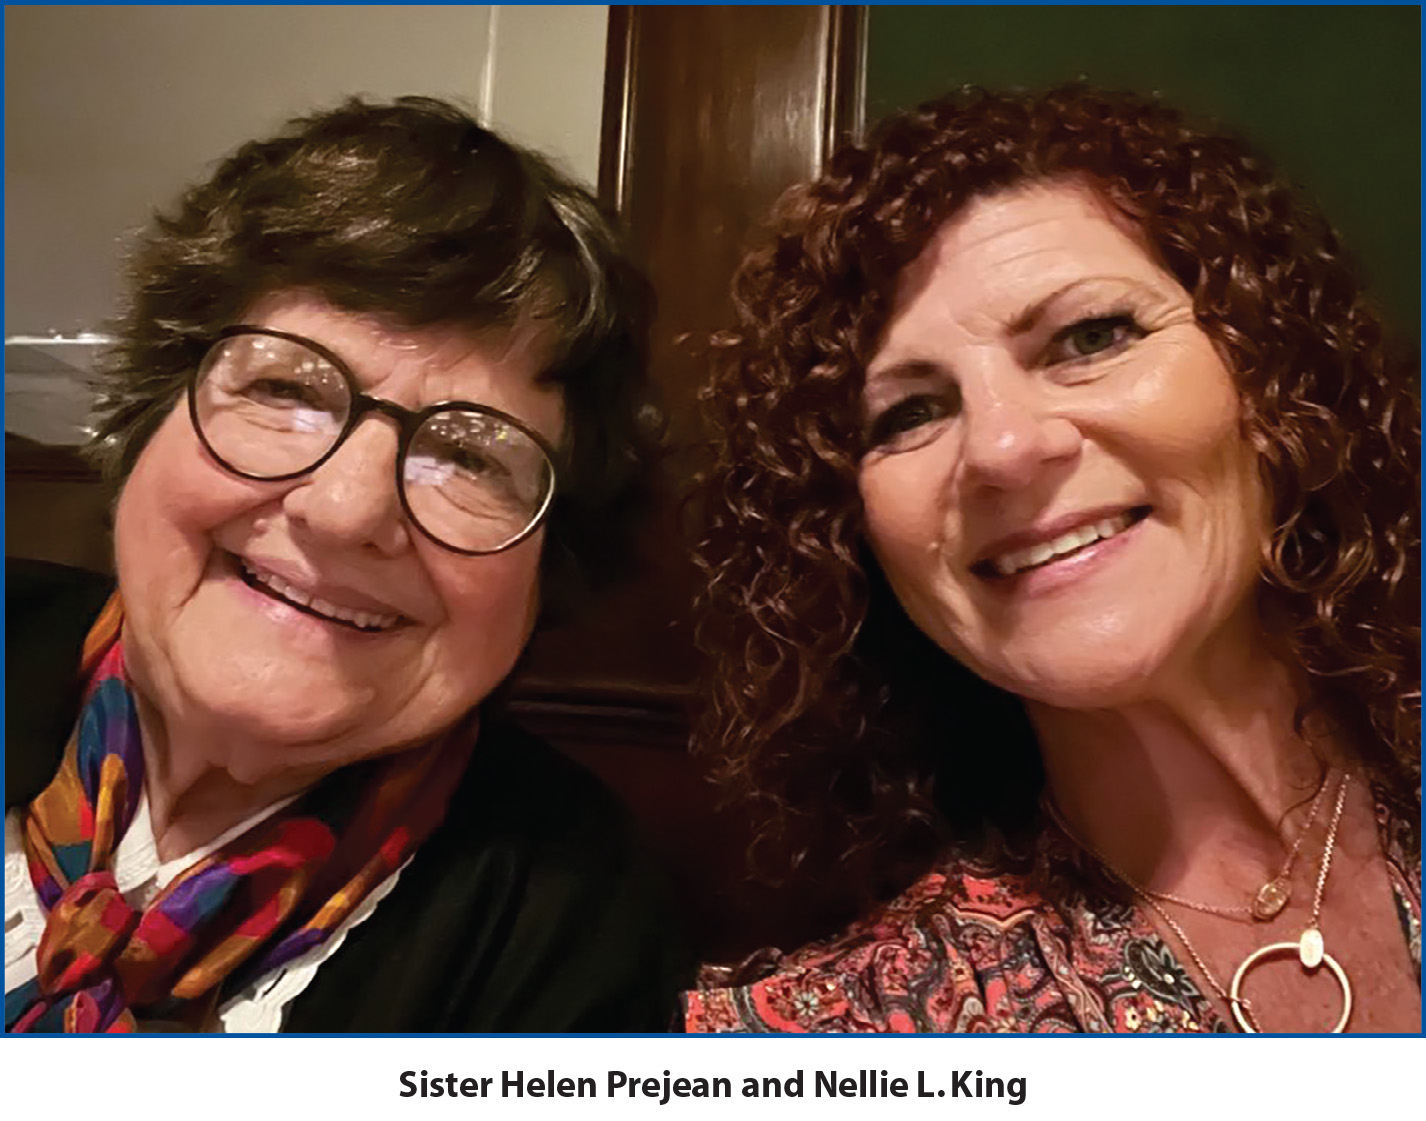 Sister Helen Prejean and Nellie L. King